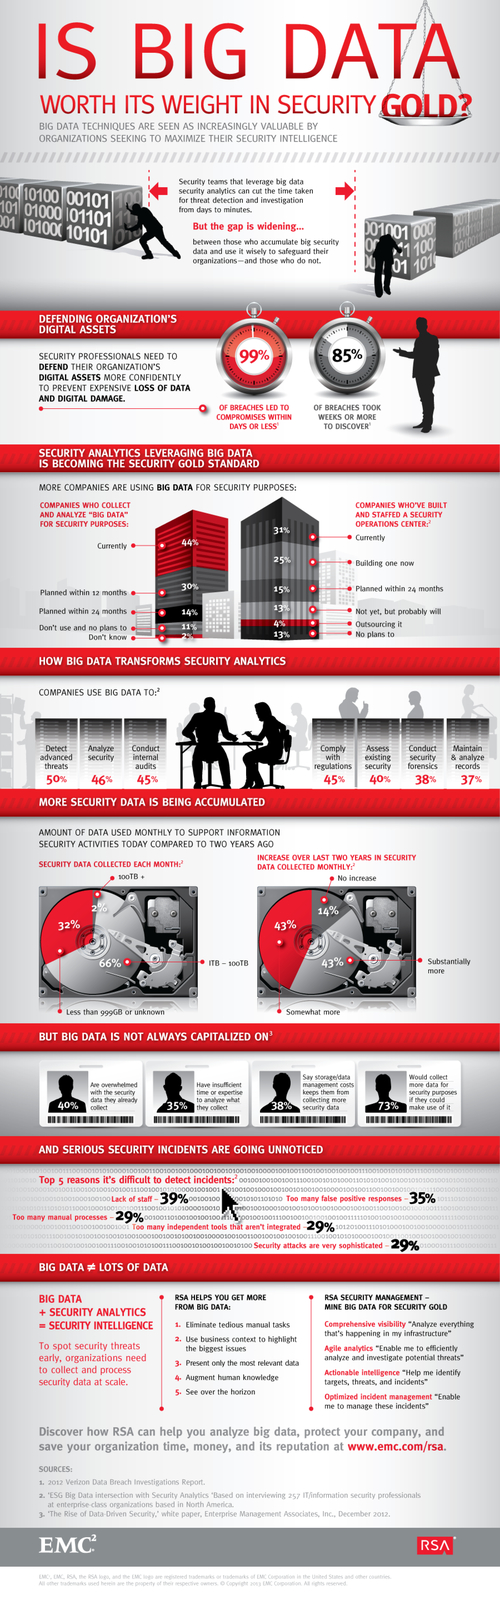 Infographic - Is Big Data Worth Its Weight in Security Gold?